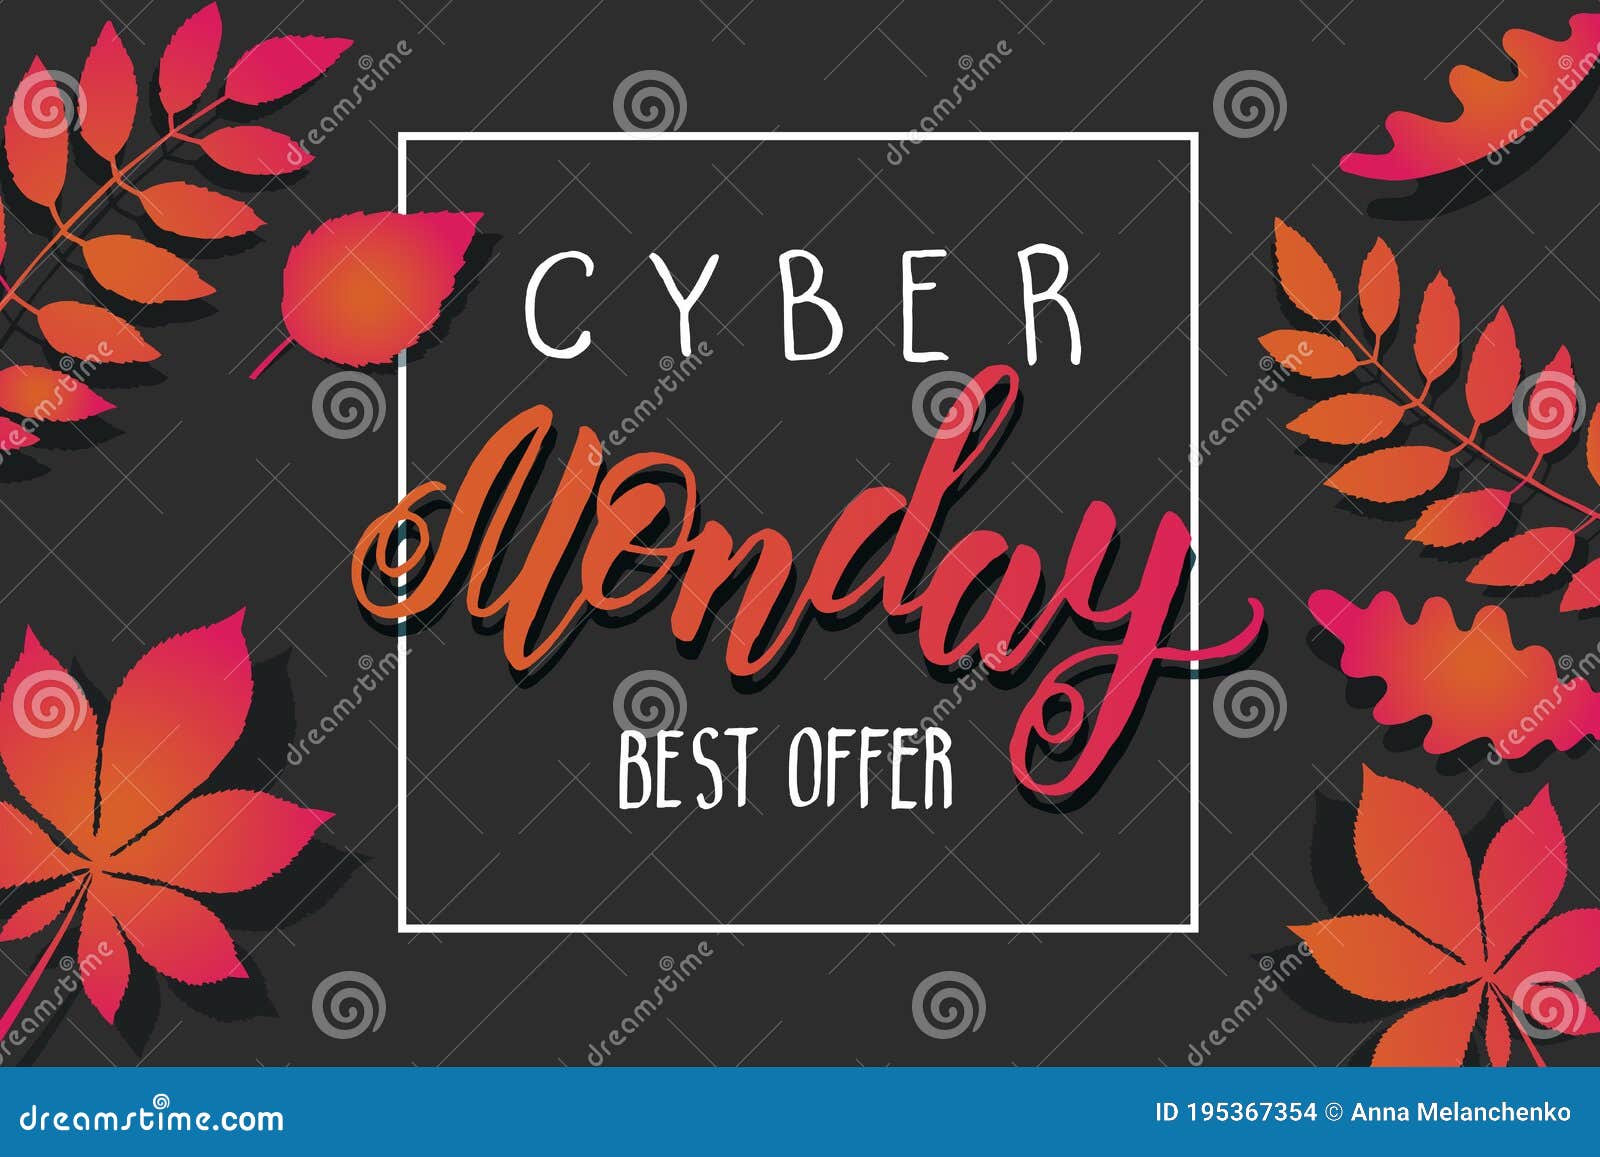 cyber monday sale background with  autumn leaves and handwritting trendy lettering. best offer.  